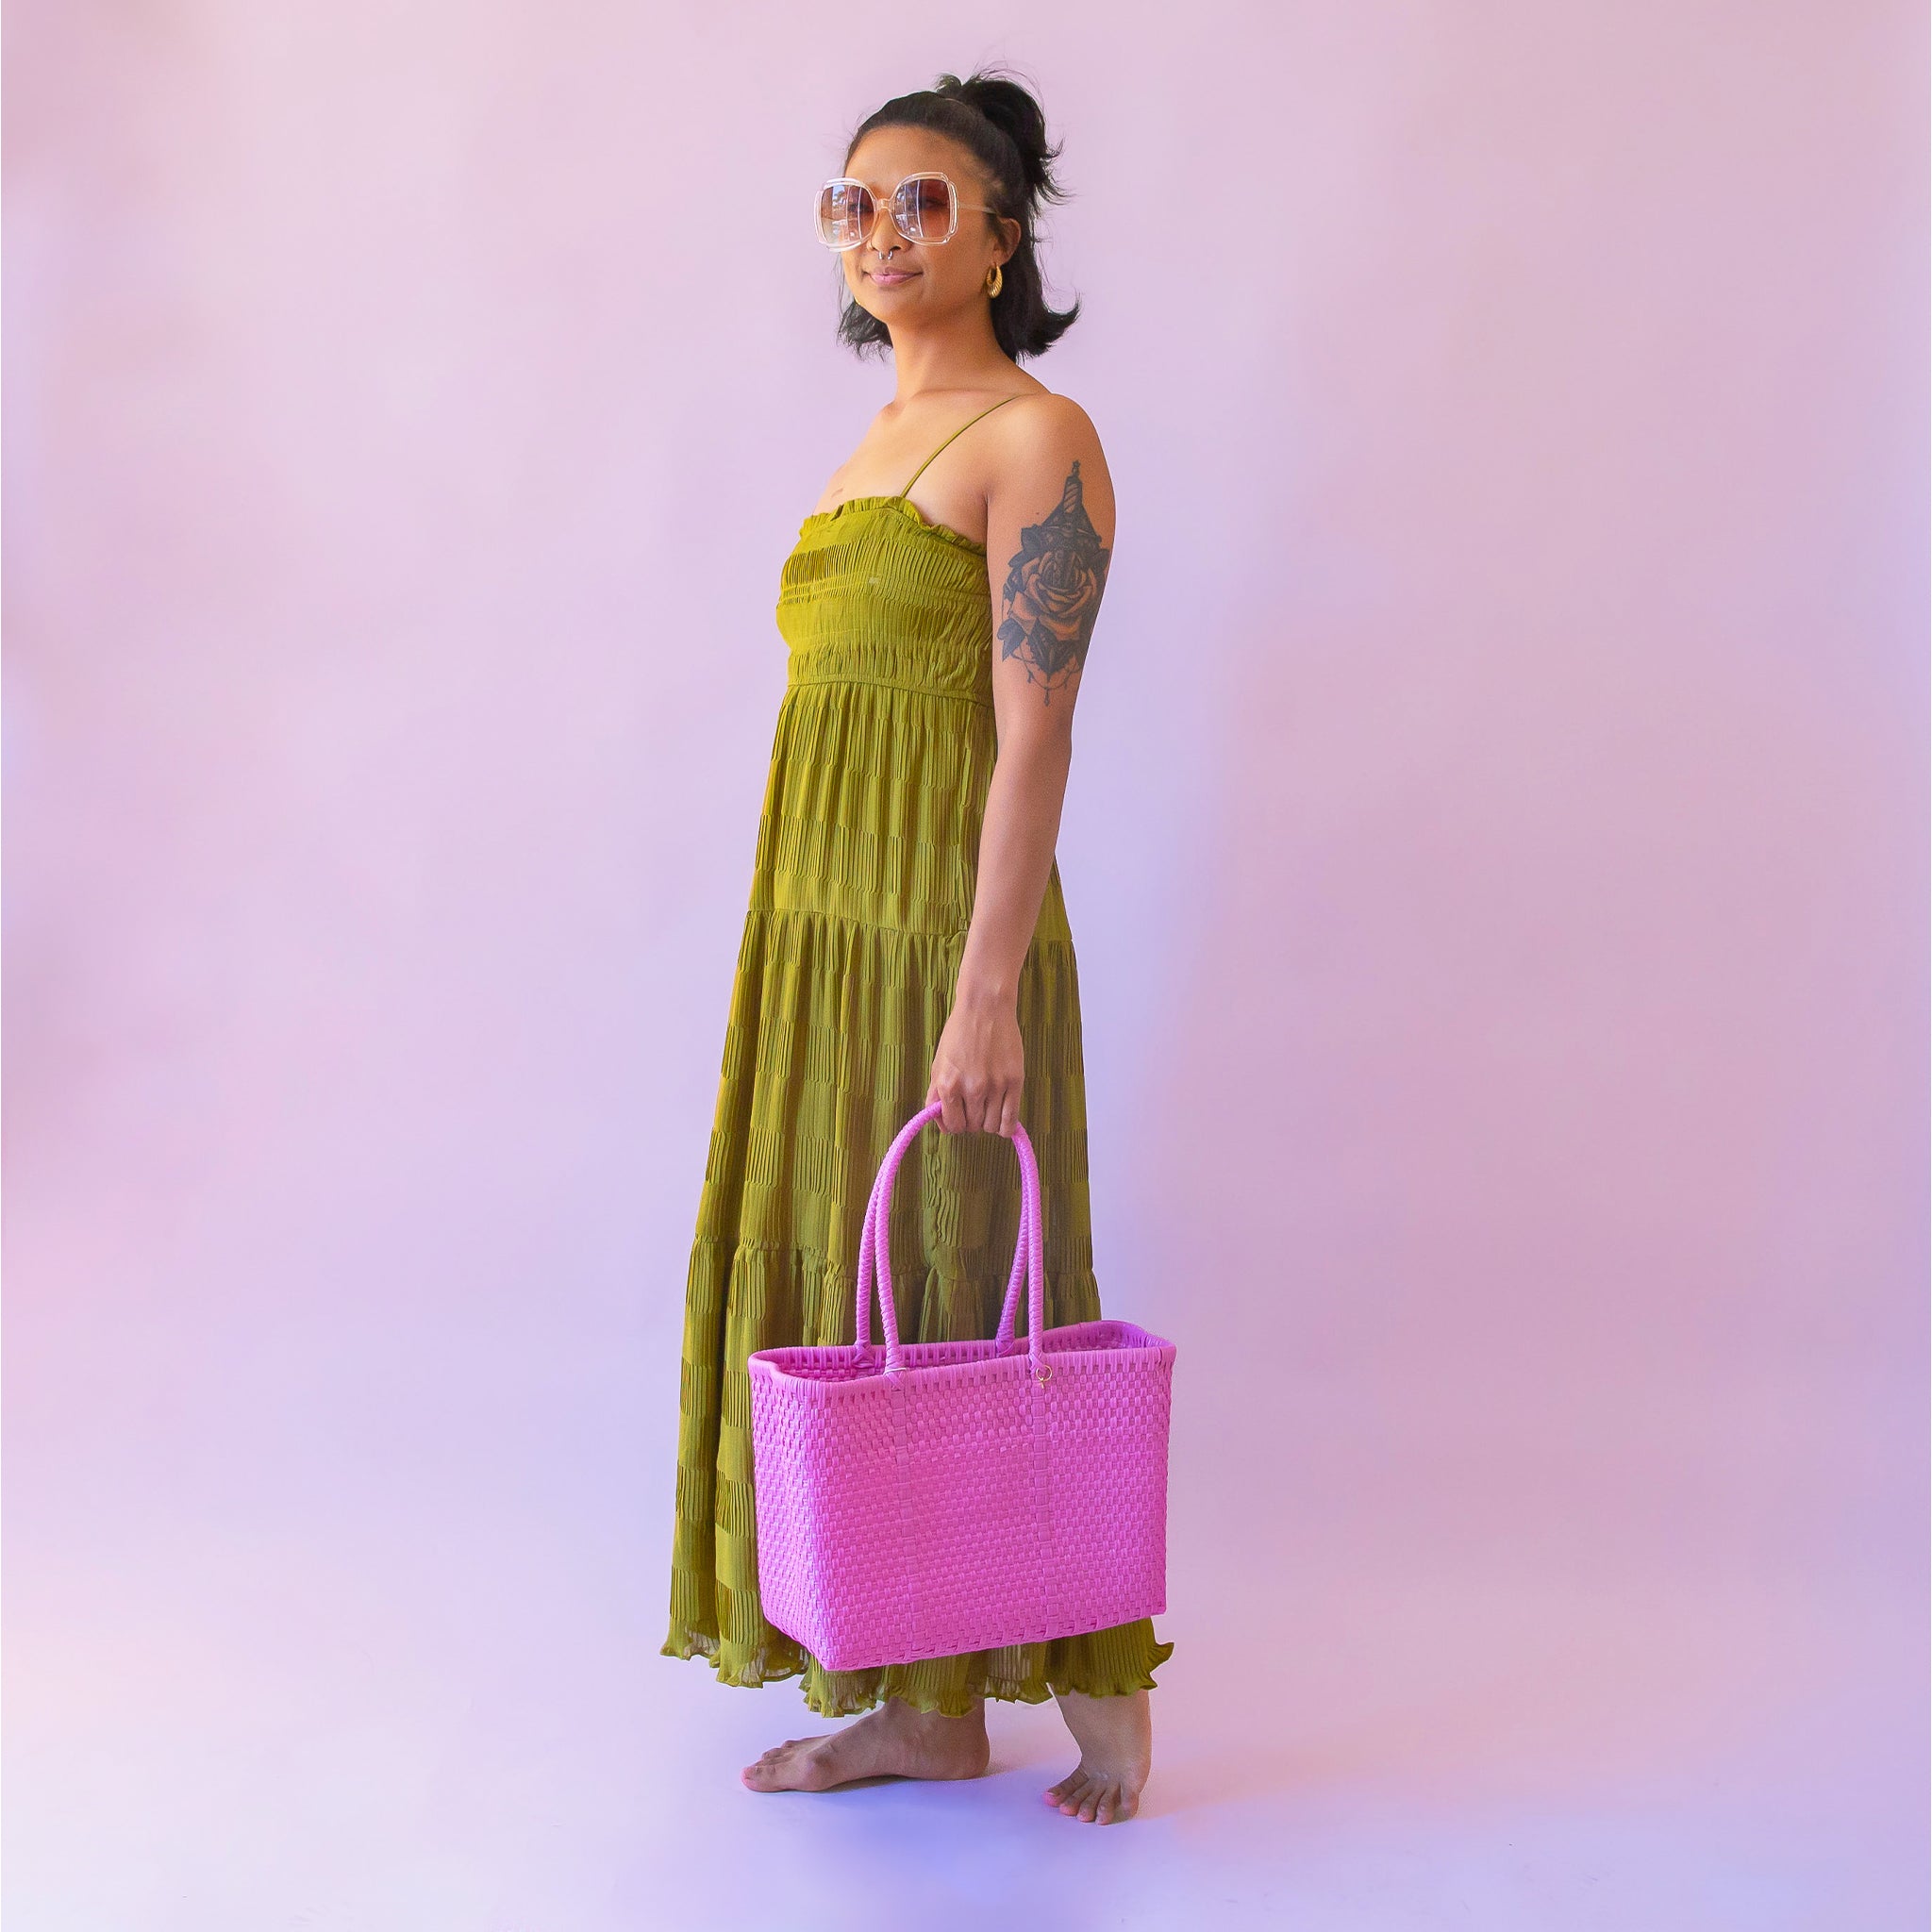 On a pink background is a hot pink woven bag.